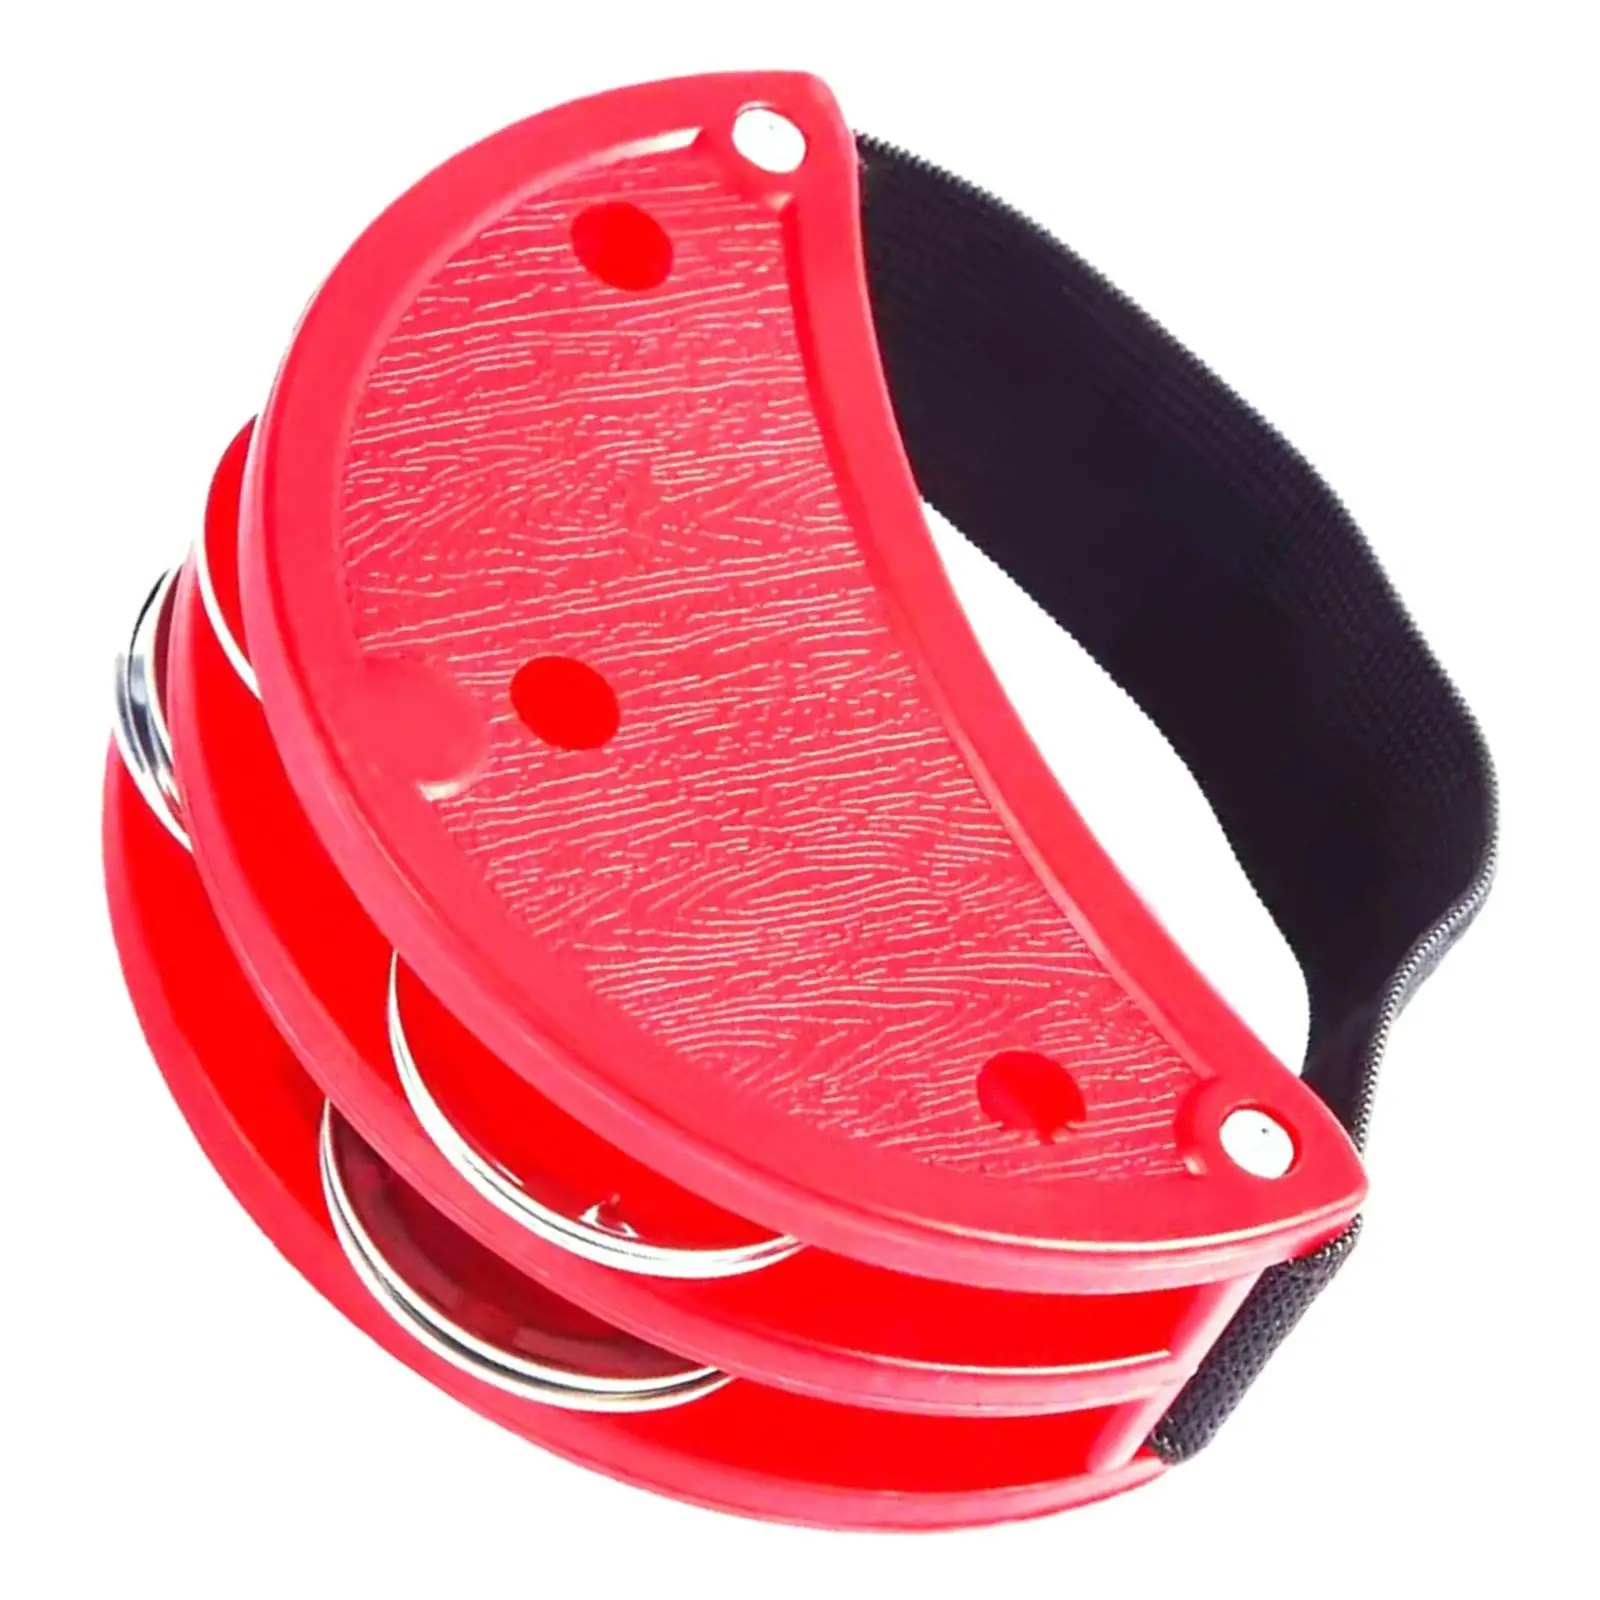 Foot Tambourine with Metal Bell Percussion Instruments for Parties